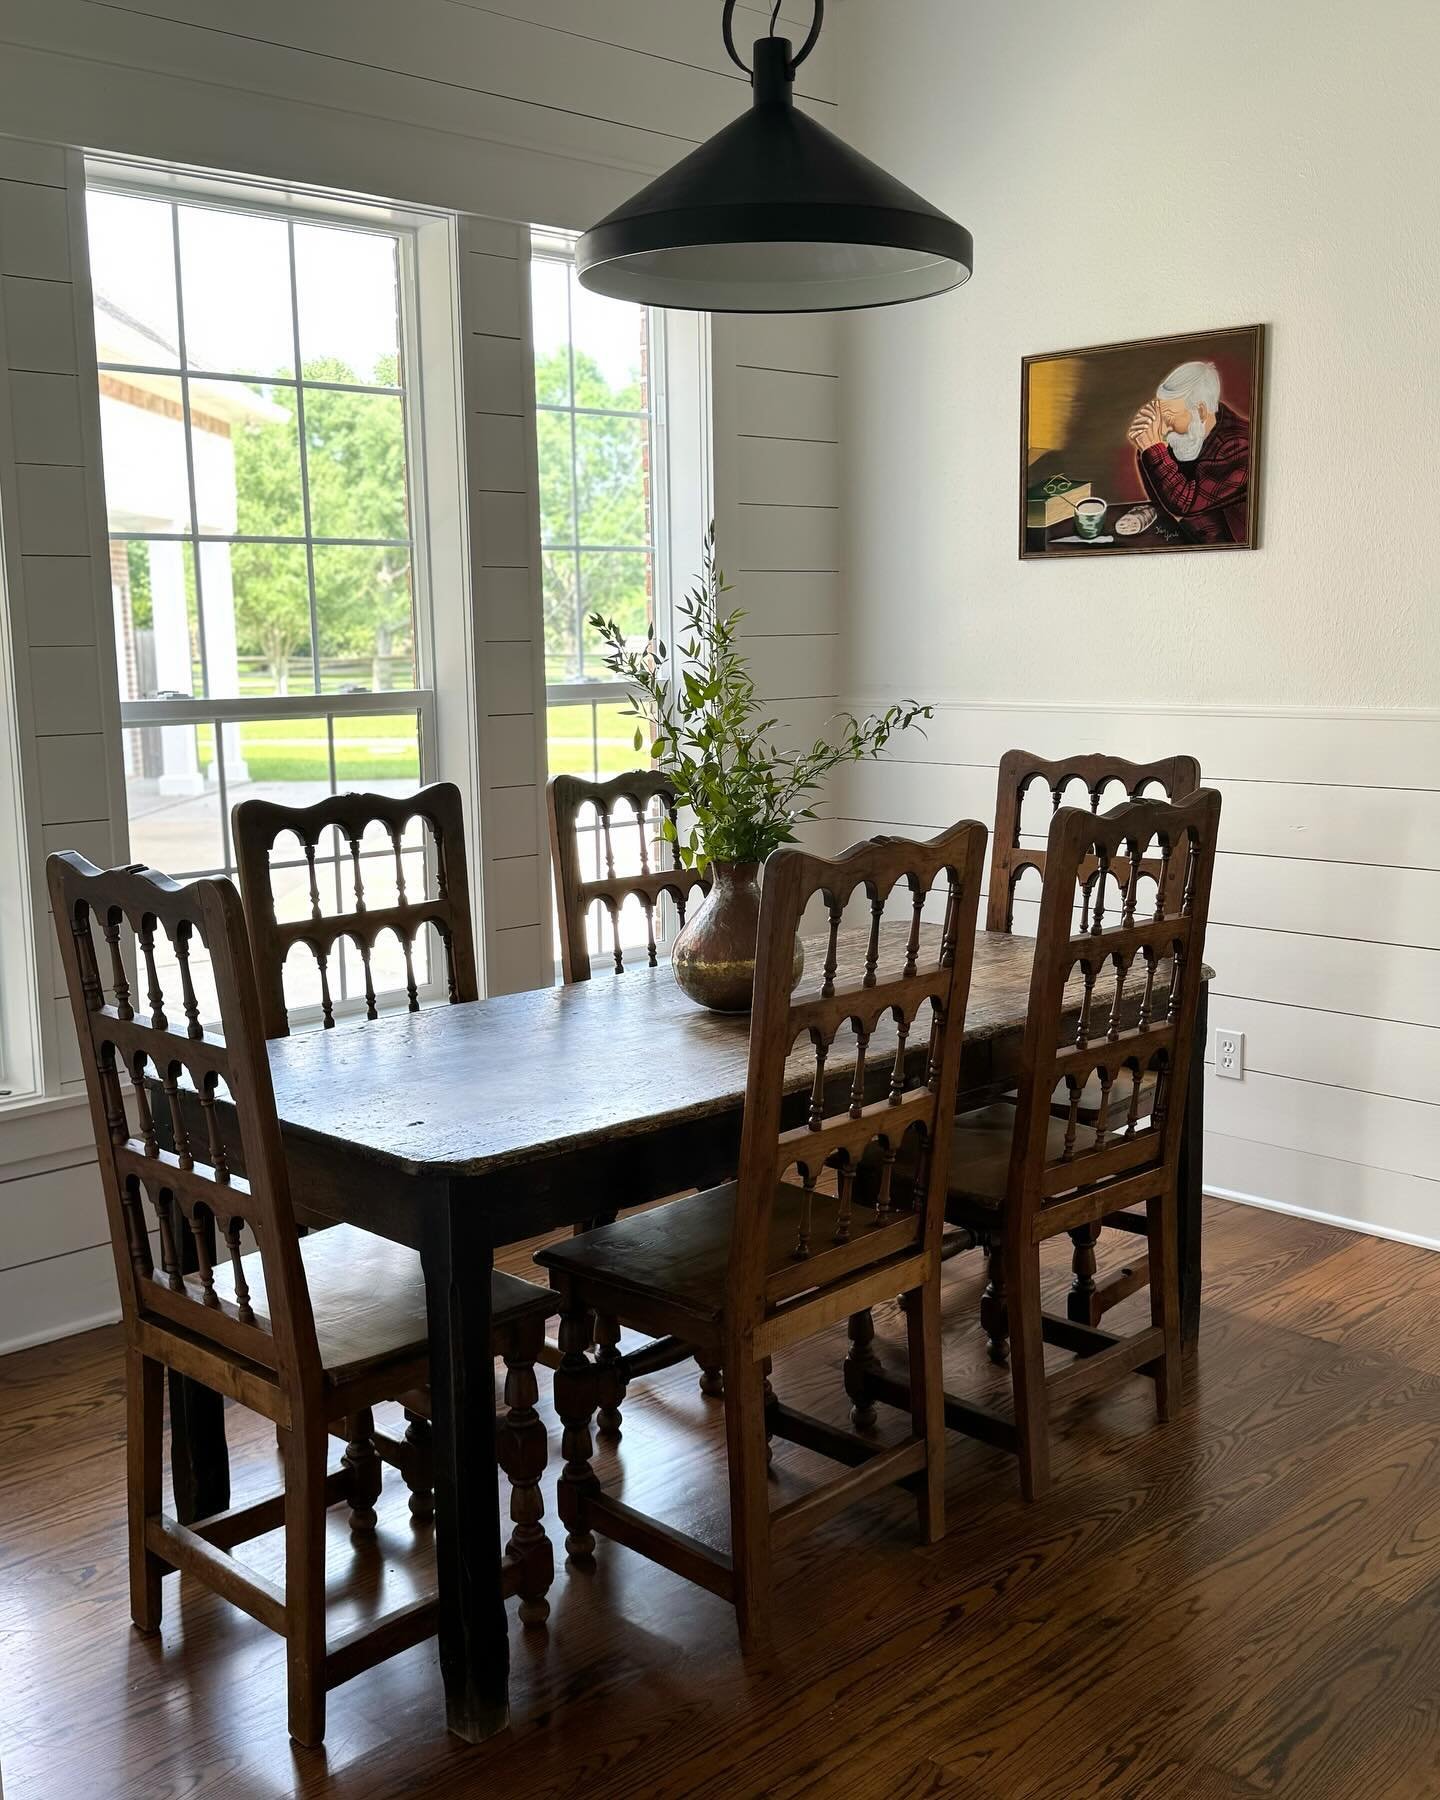 I didn&rsquo;t know new chairs in our breakfast room could make me smile every time I look at them. I snagged them at the Round Top Winter Show &amp; finally just got them into place a week ago. I was shopping for clients but when I saw them &amp; im